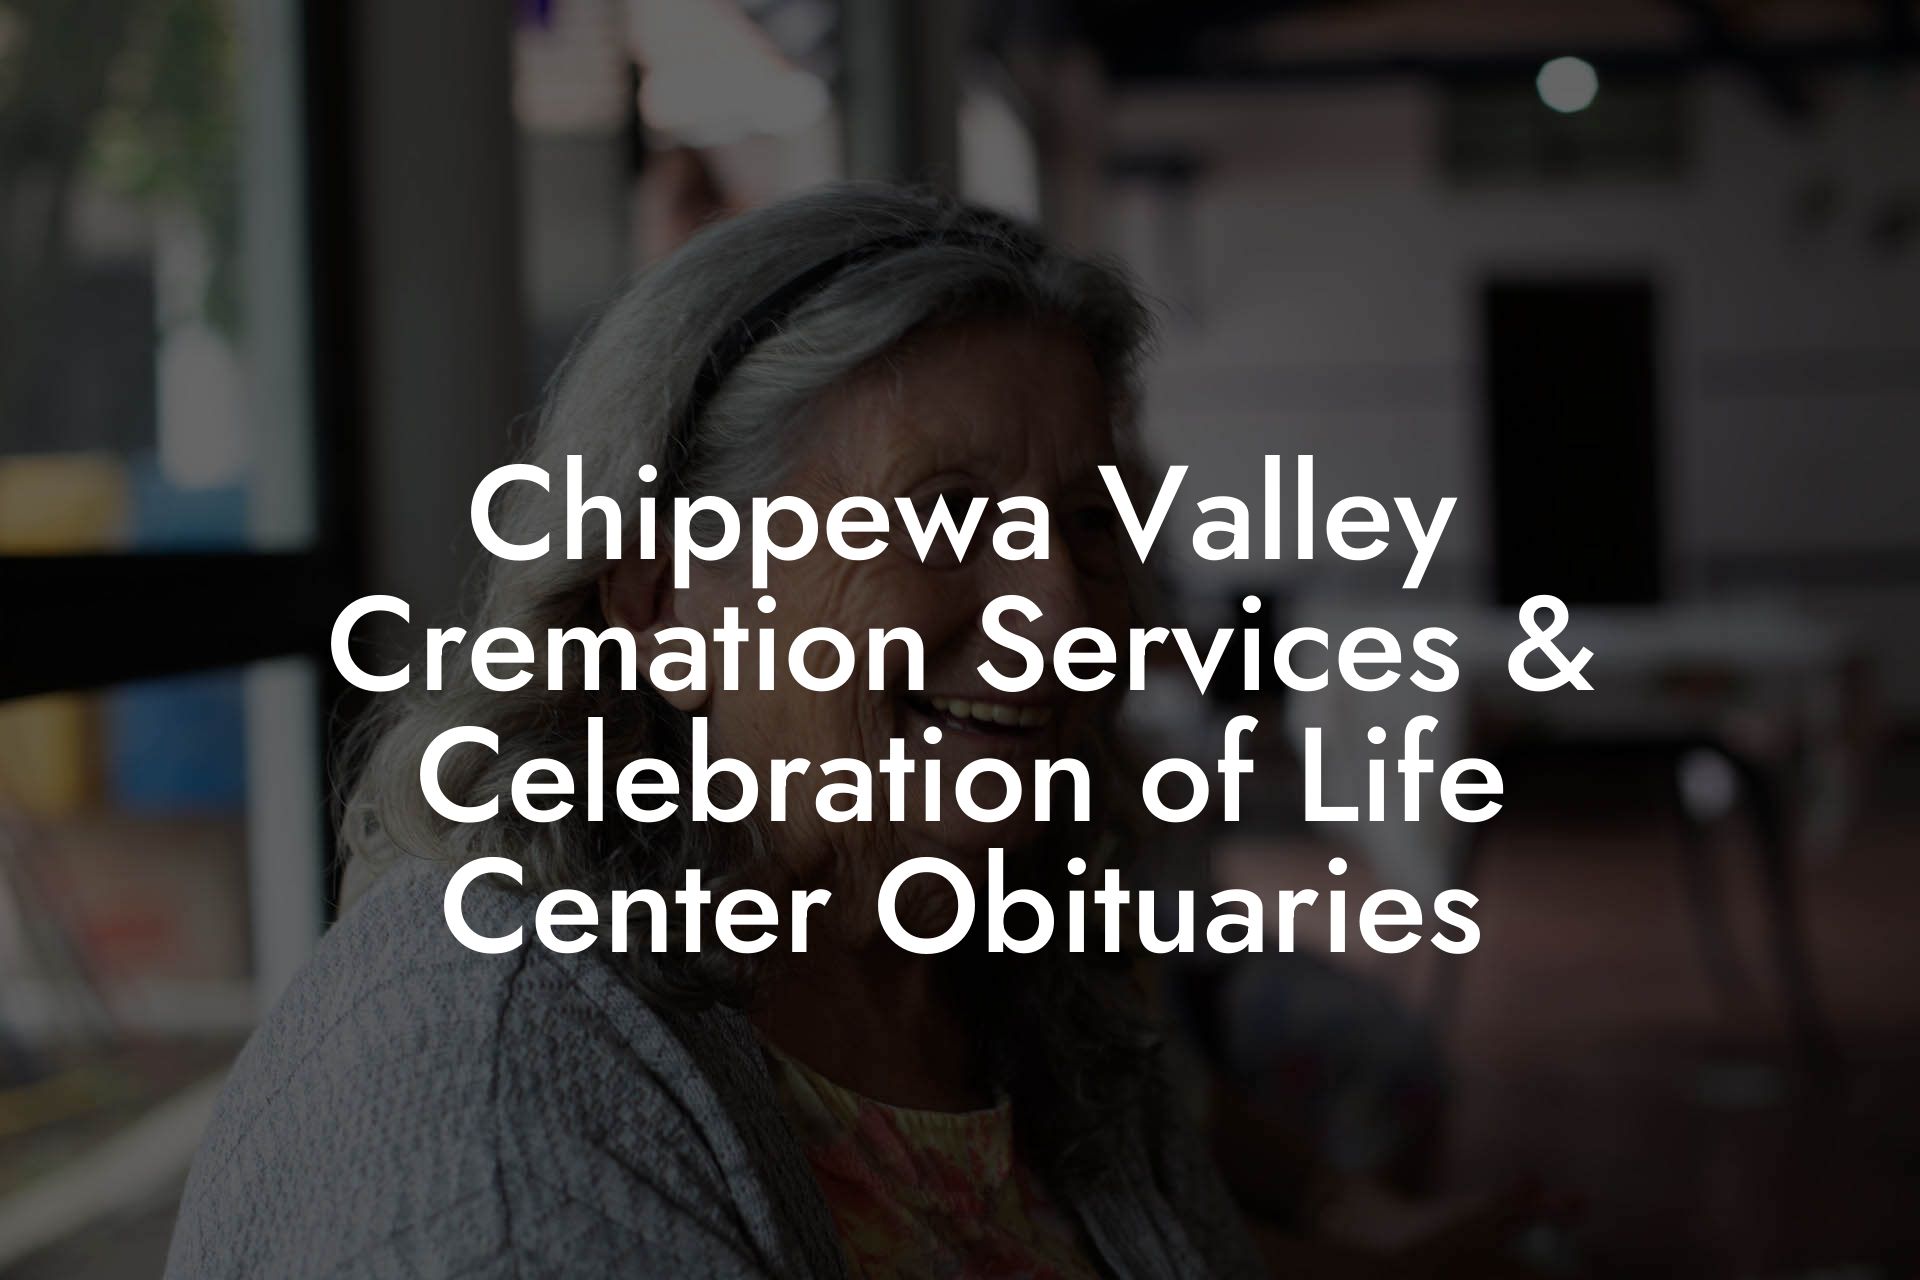 Chippewa Valley Cremation Services & Celebration of Life Center Obituaries